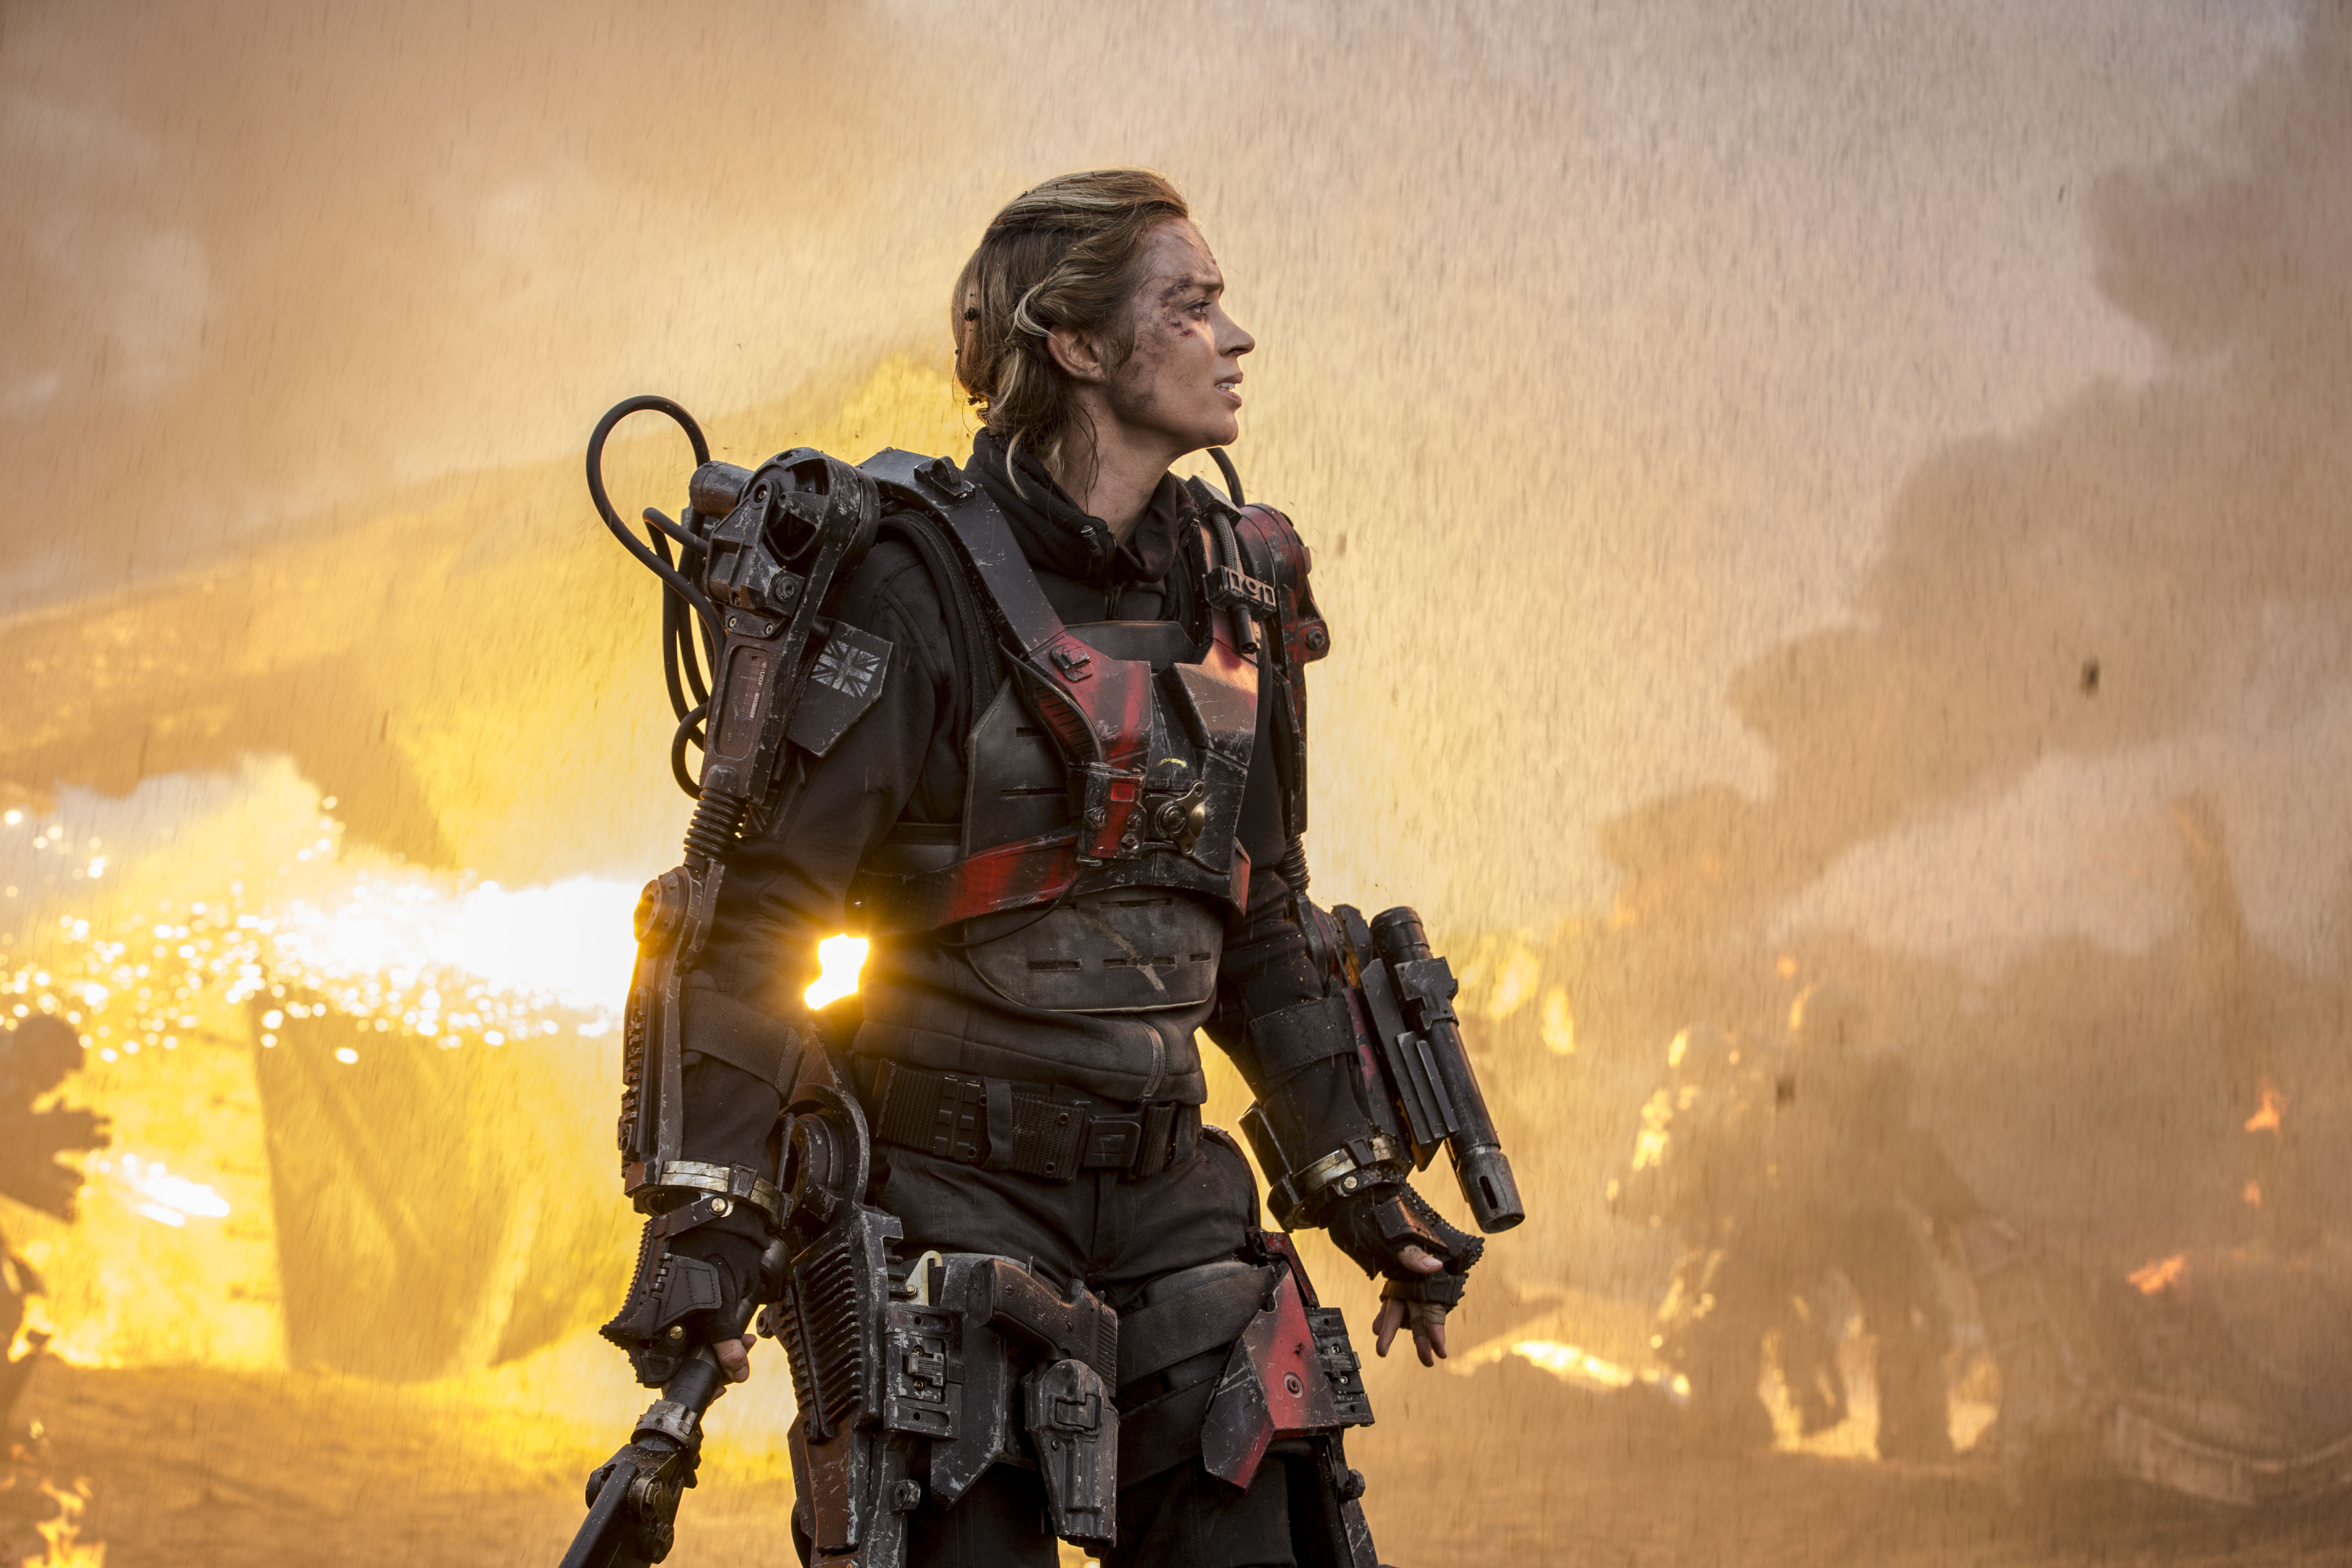 HQ Edge Of Tomorrow Wallpapers | File 1833.79Kb